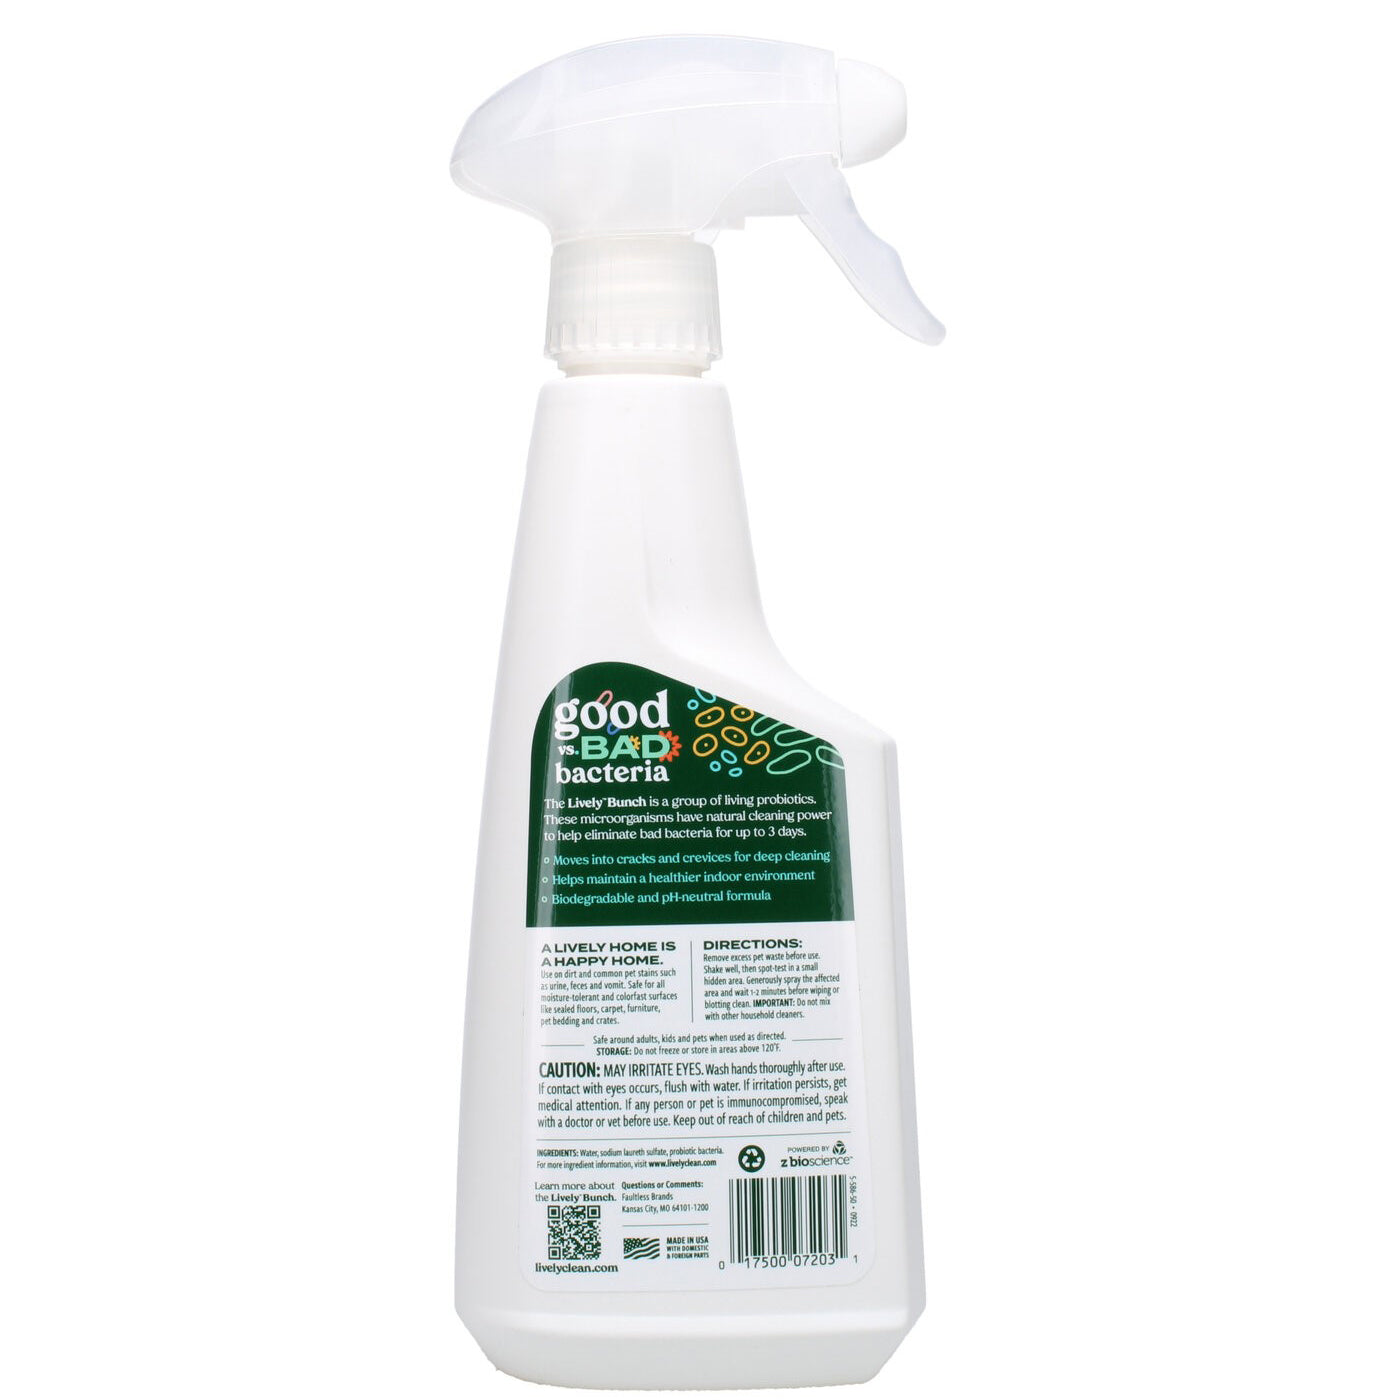 Lively Stain + Odor Remover